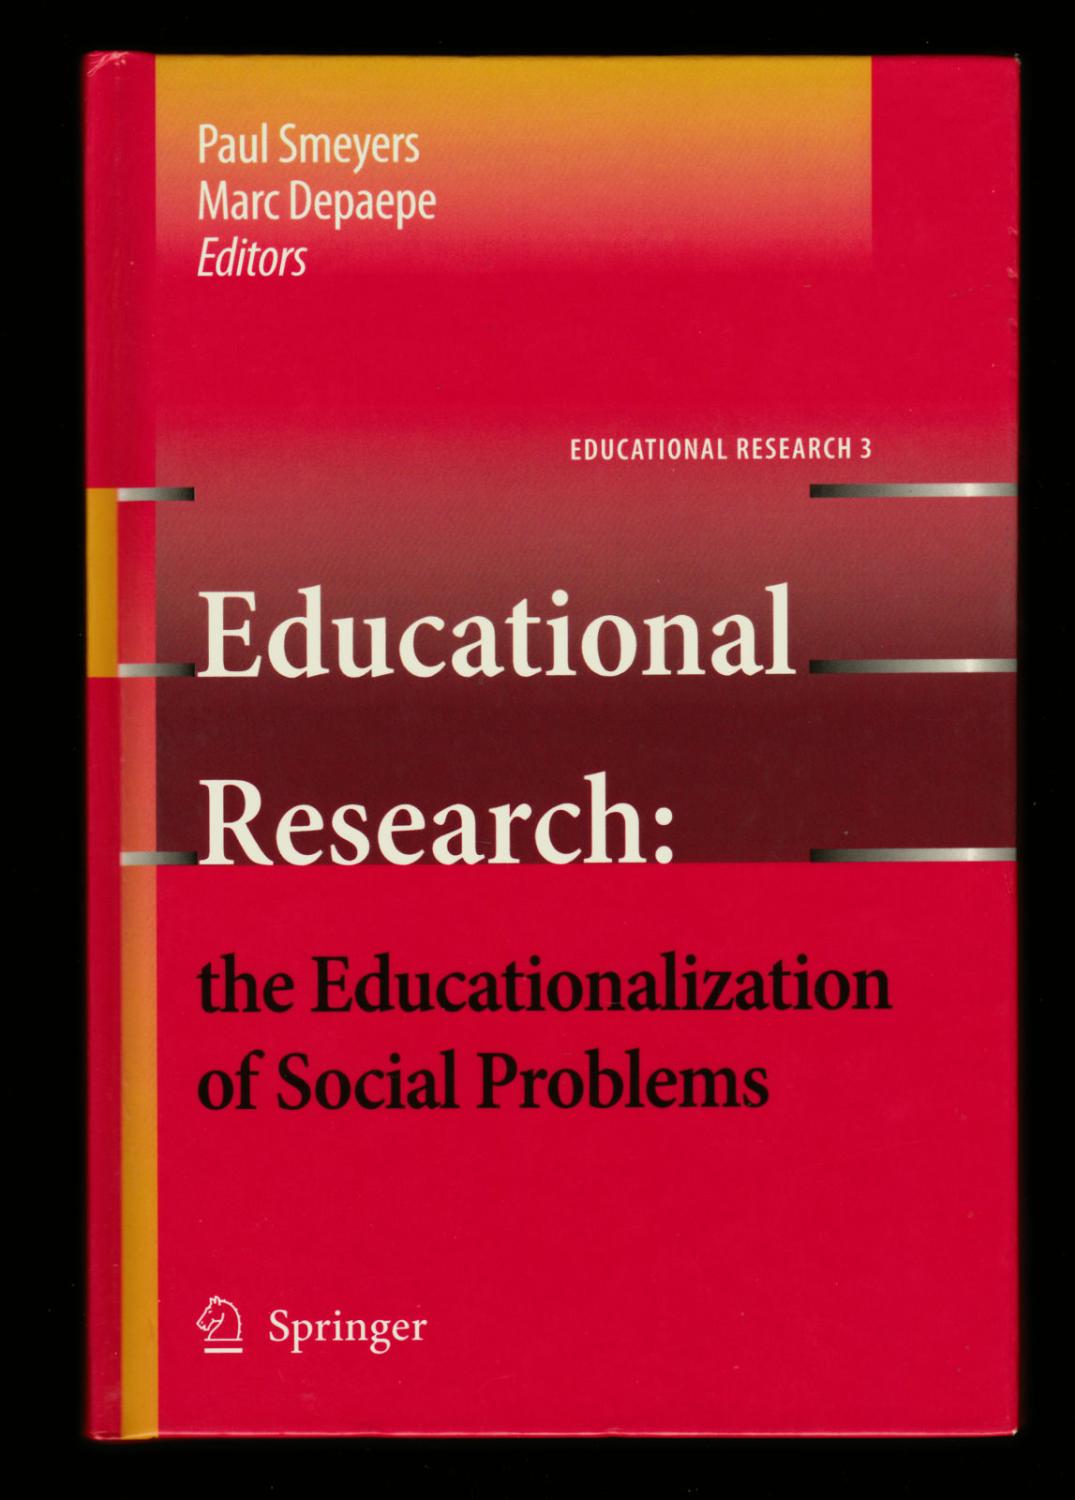 Educational Research: The Educationalization of Social Problems (Educational Research: Networks and Technologies) - Paul Smeyers; Marc Depaepe